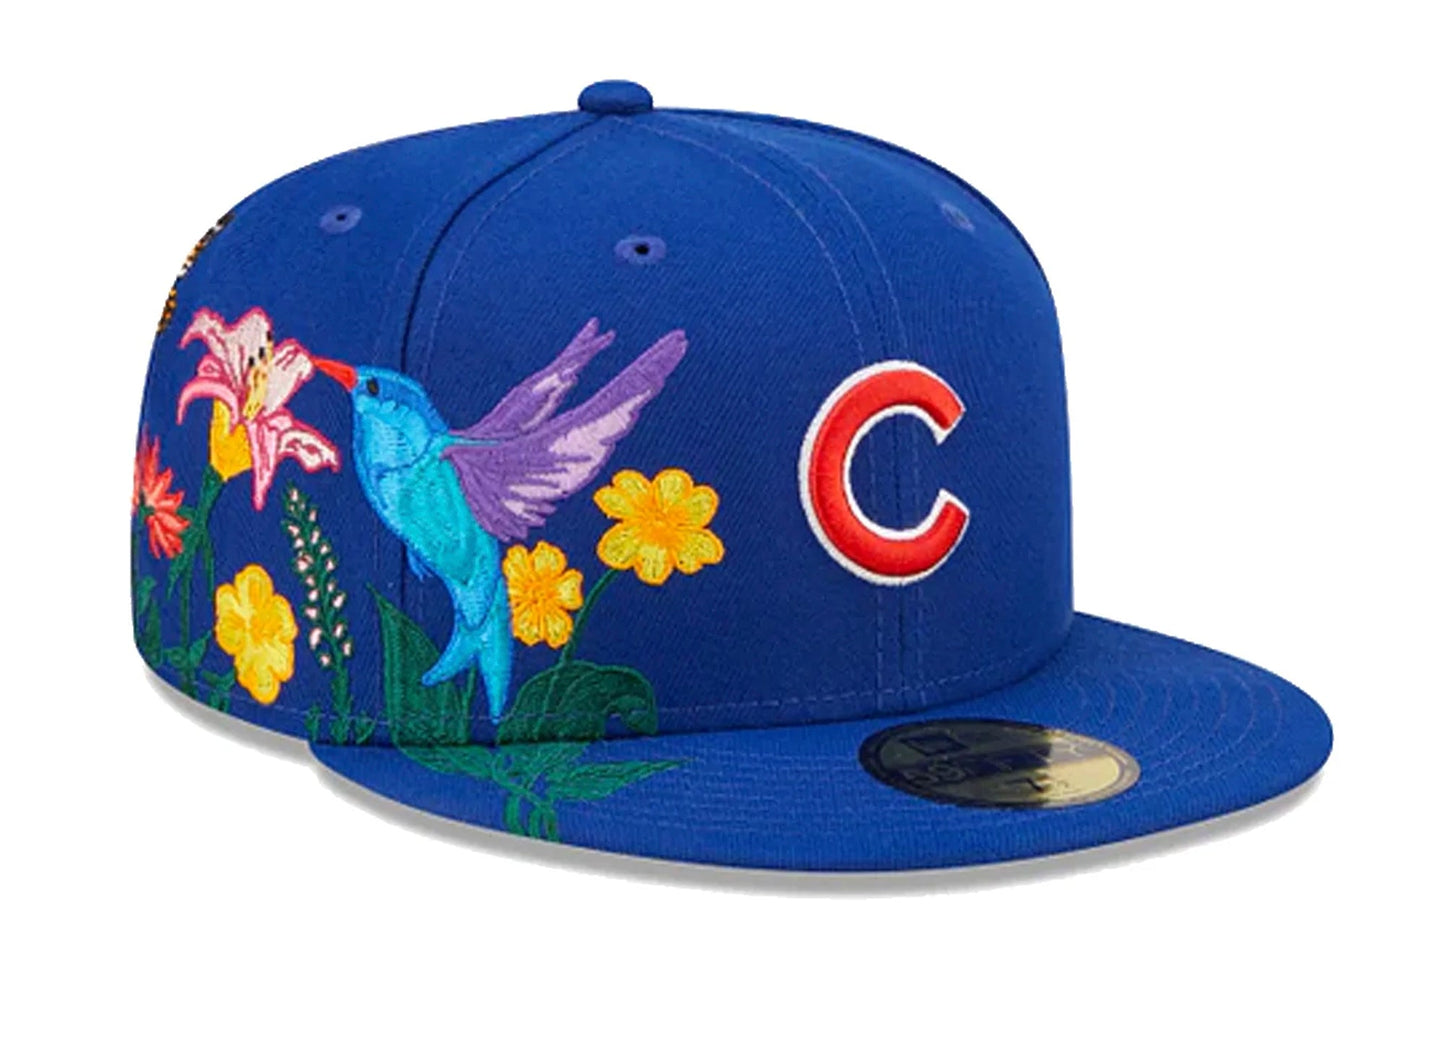 New Era Blooming Chicago Cubs Hat